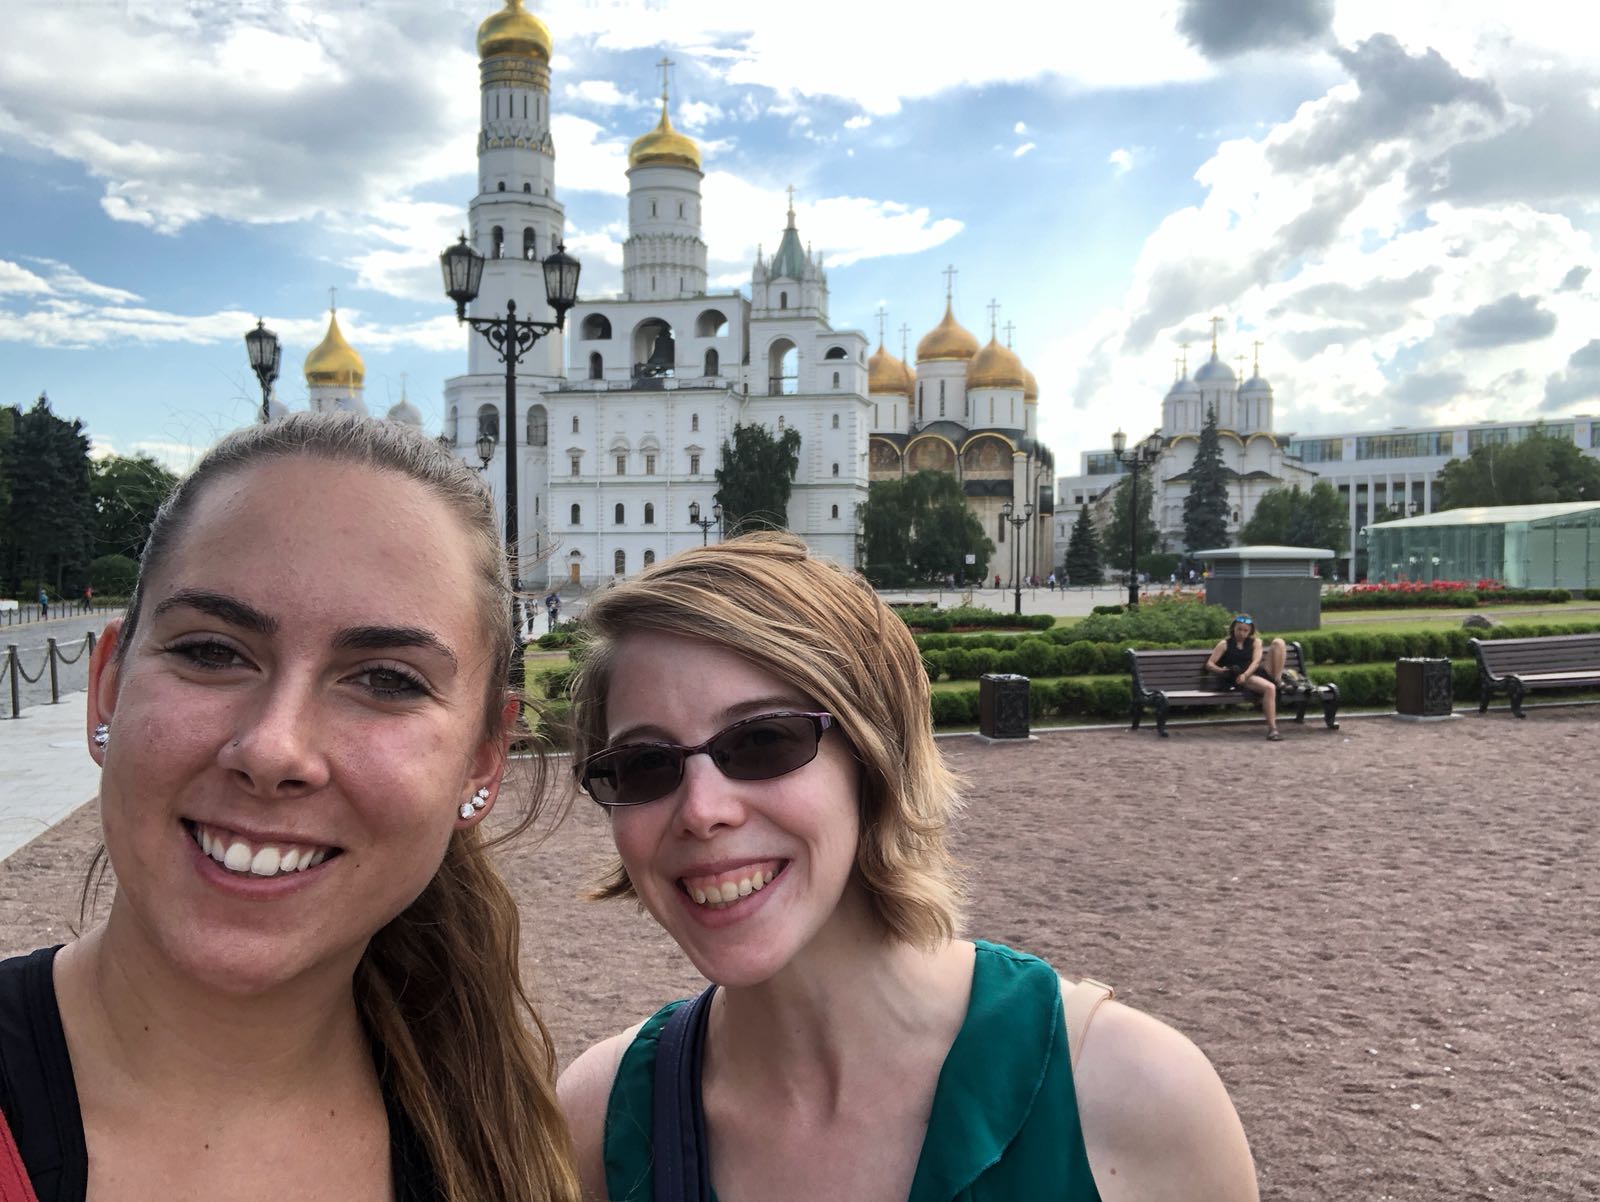 Ms. Williams and one of her younger peers, smiling in front of a cathedral in Russia